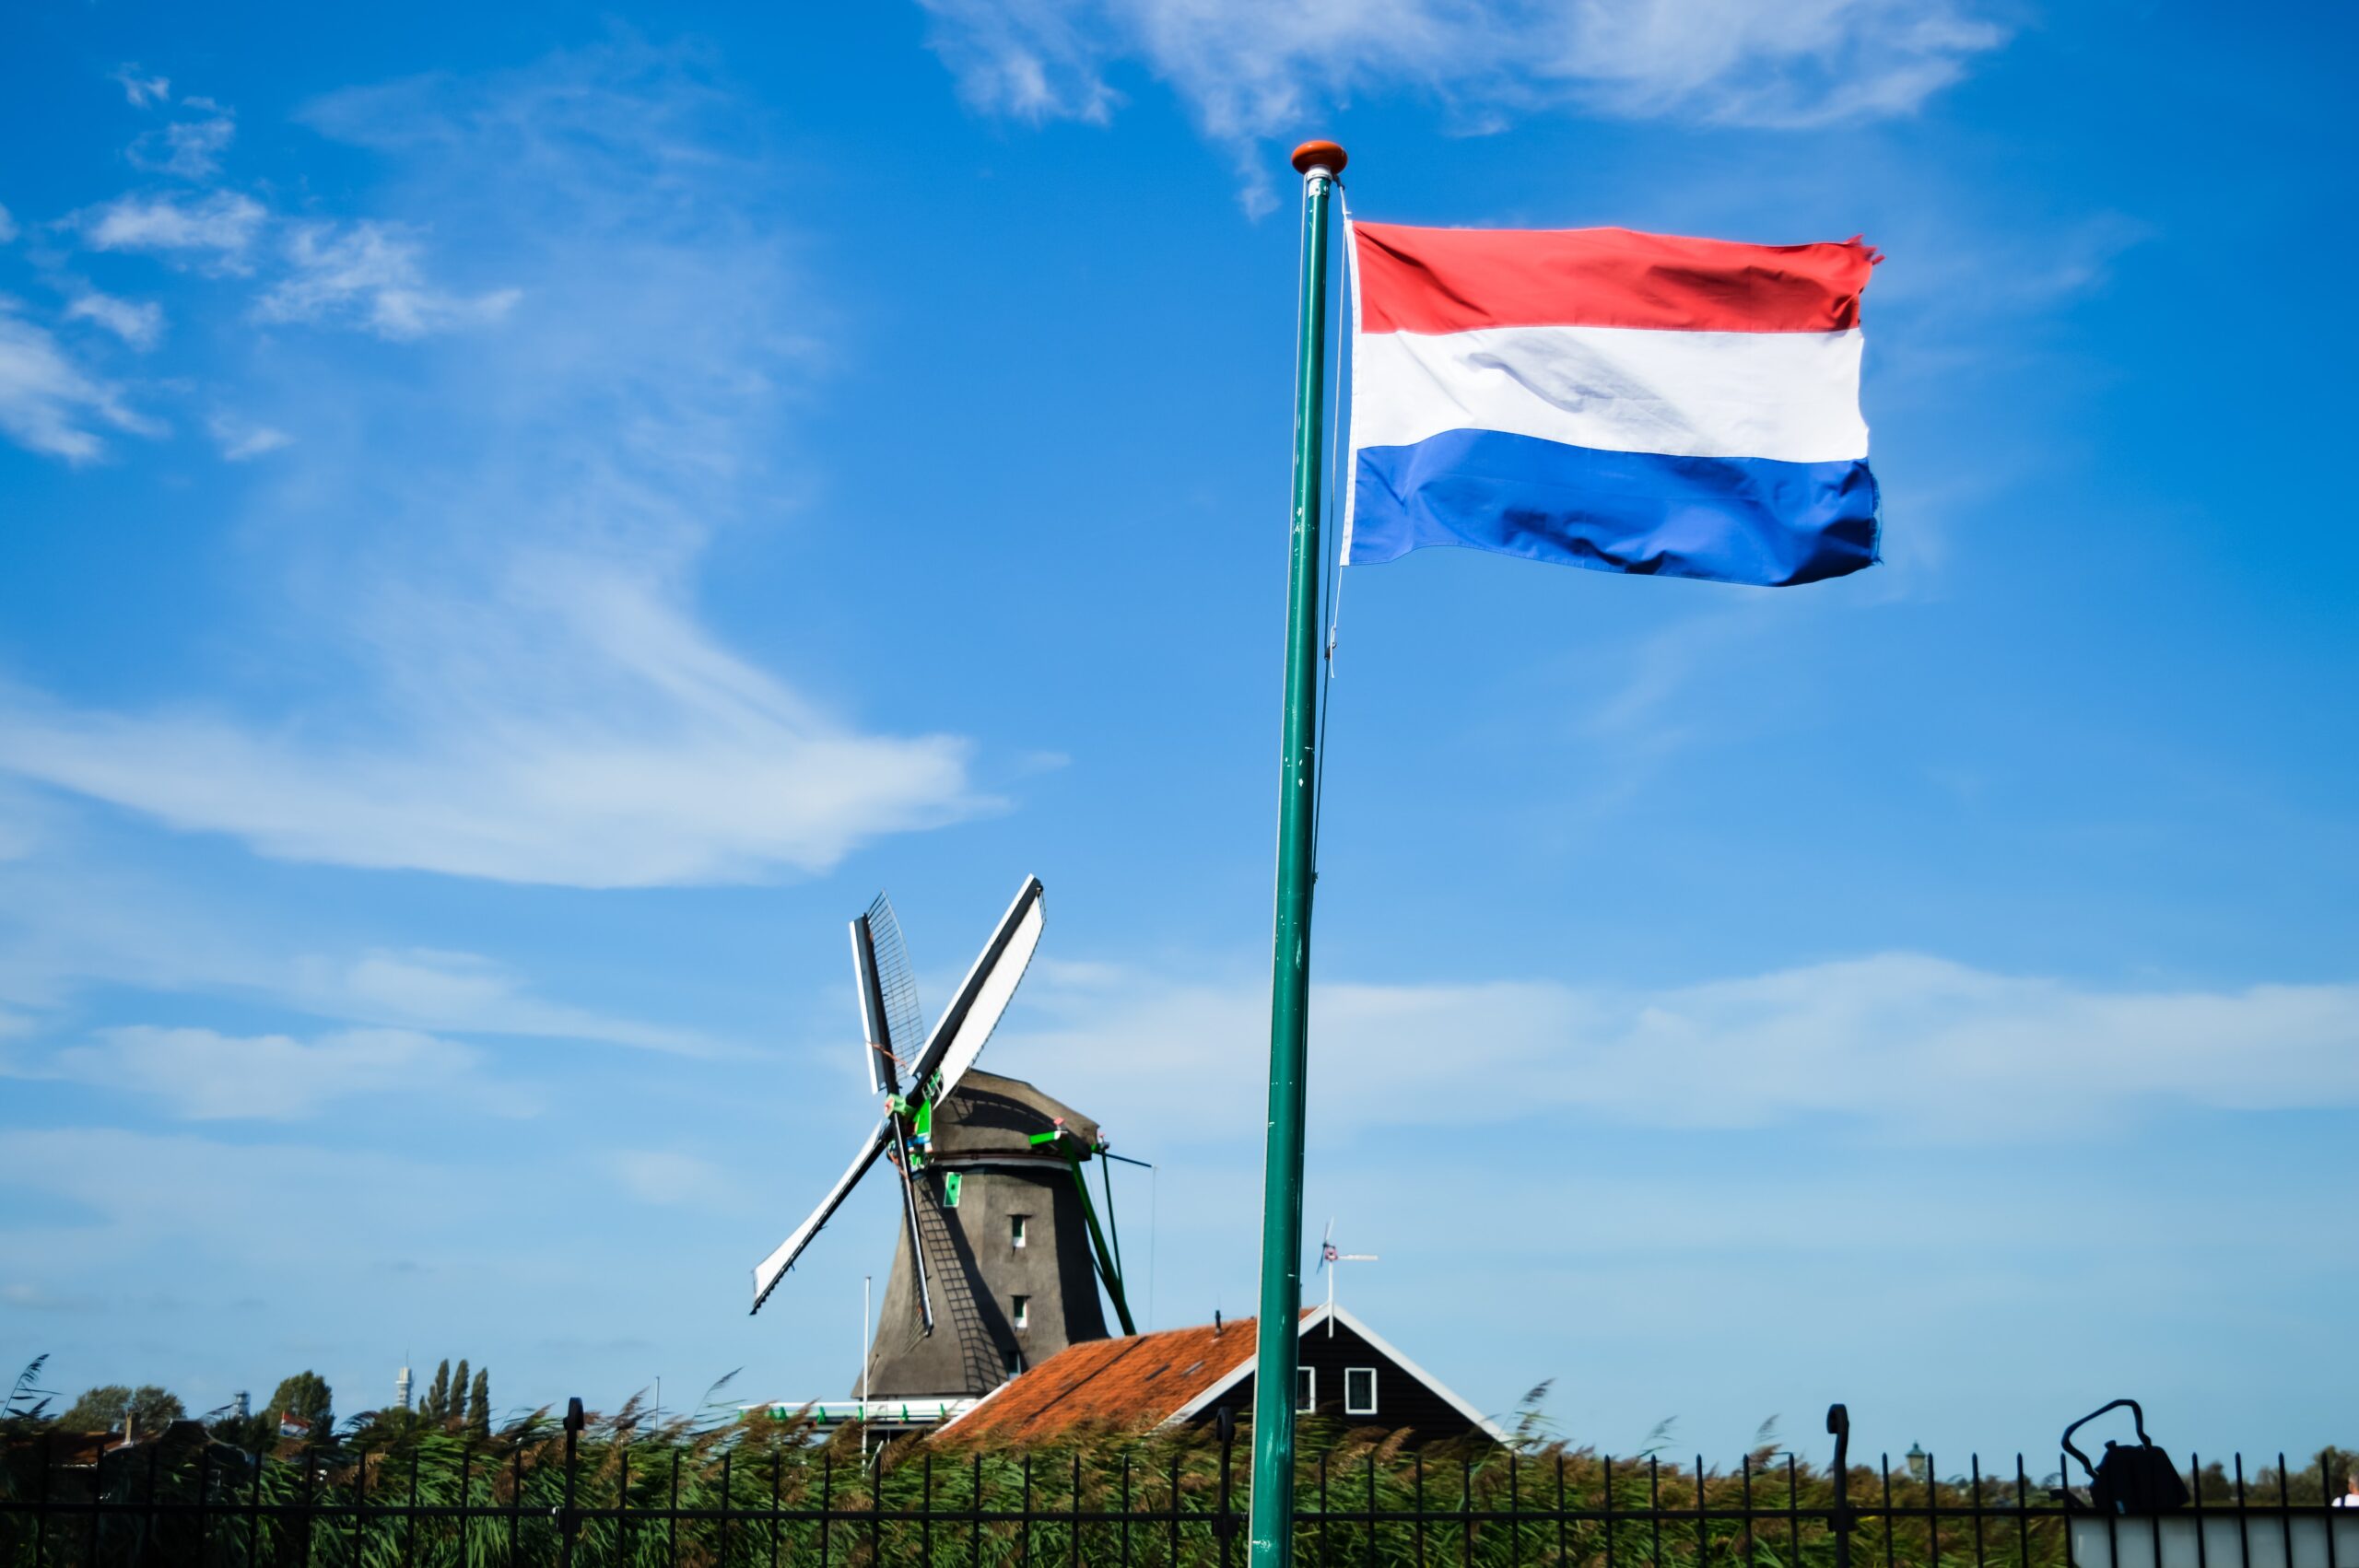 New cannabis distribution facility opens in Netherlands